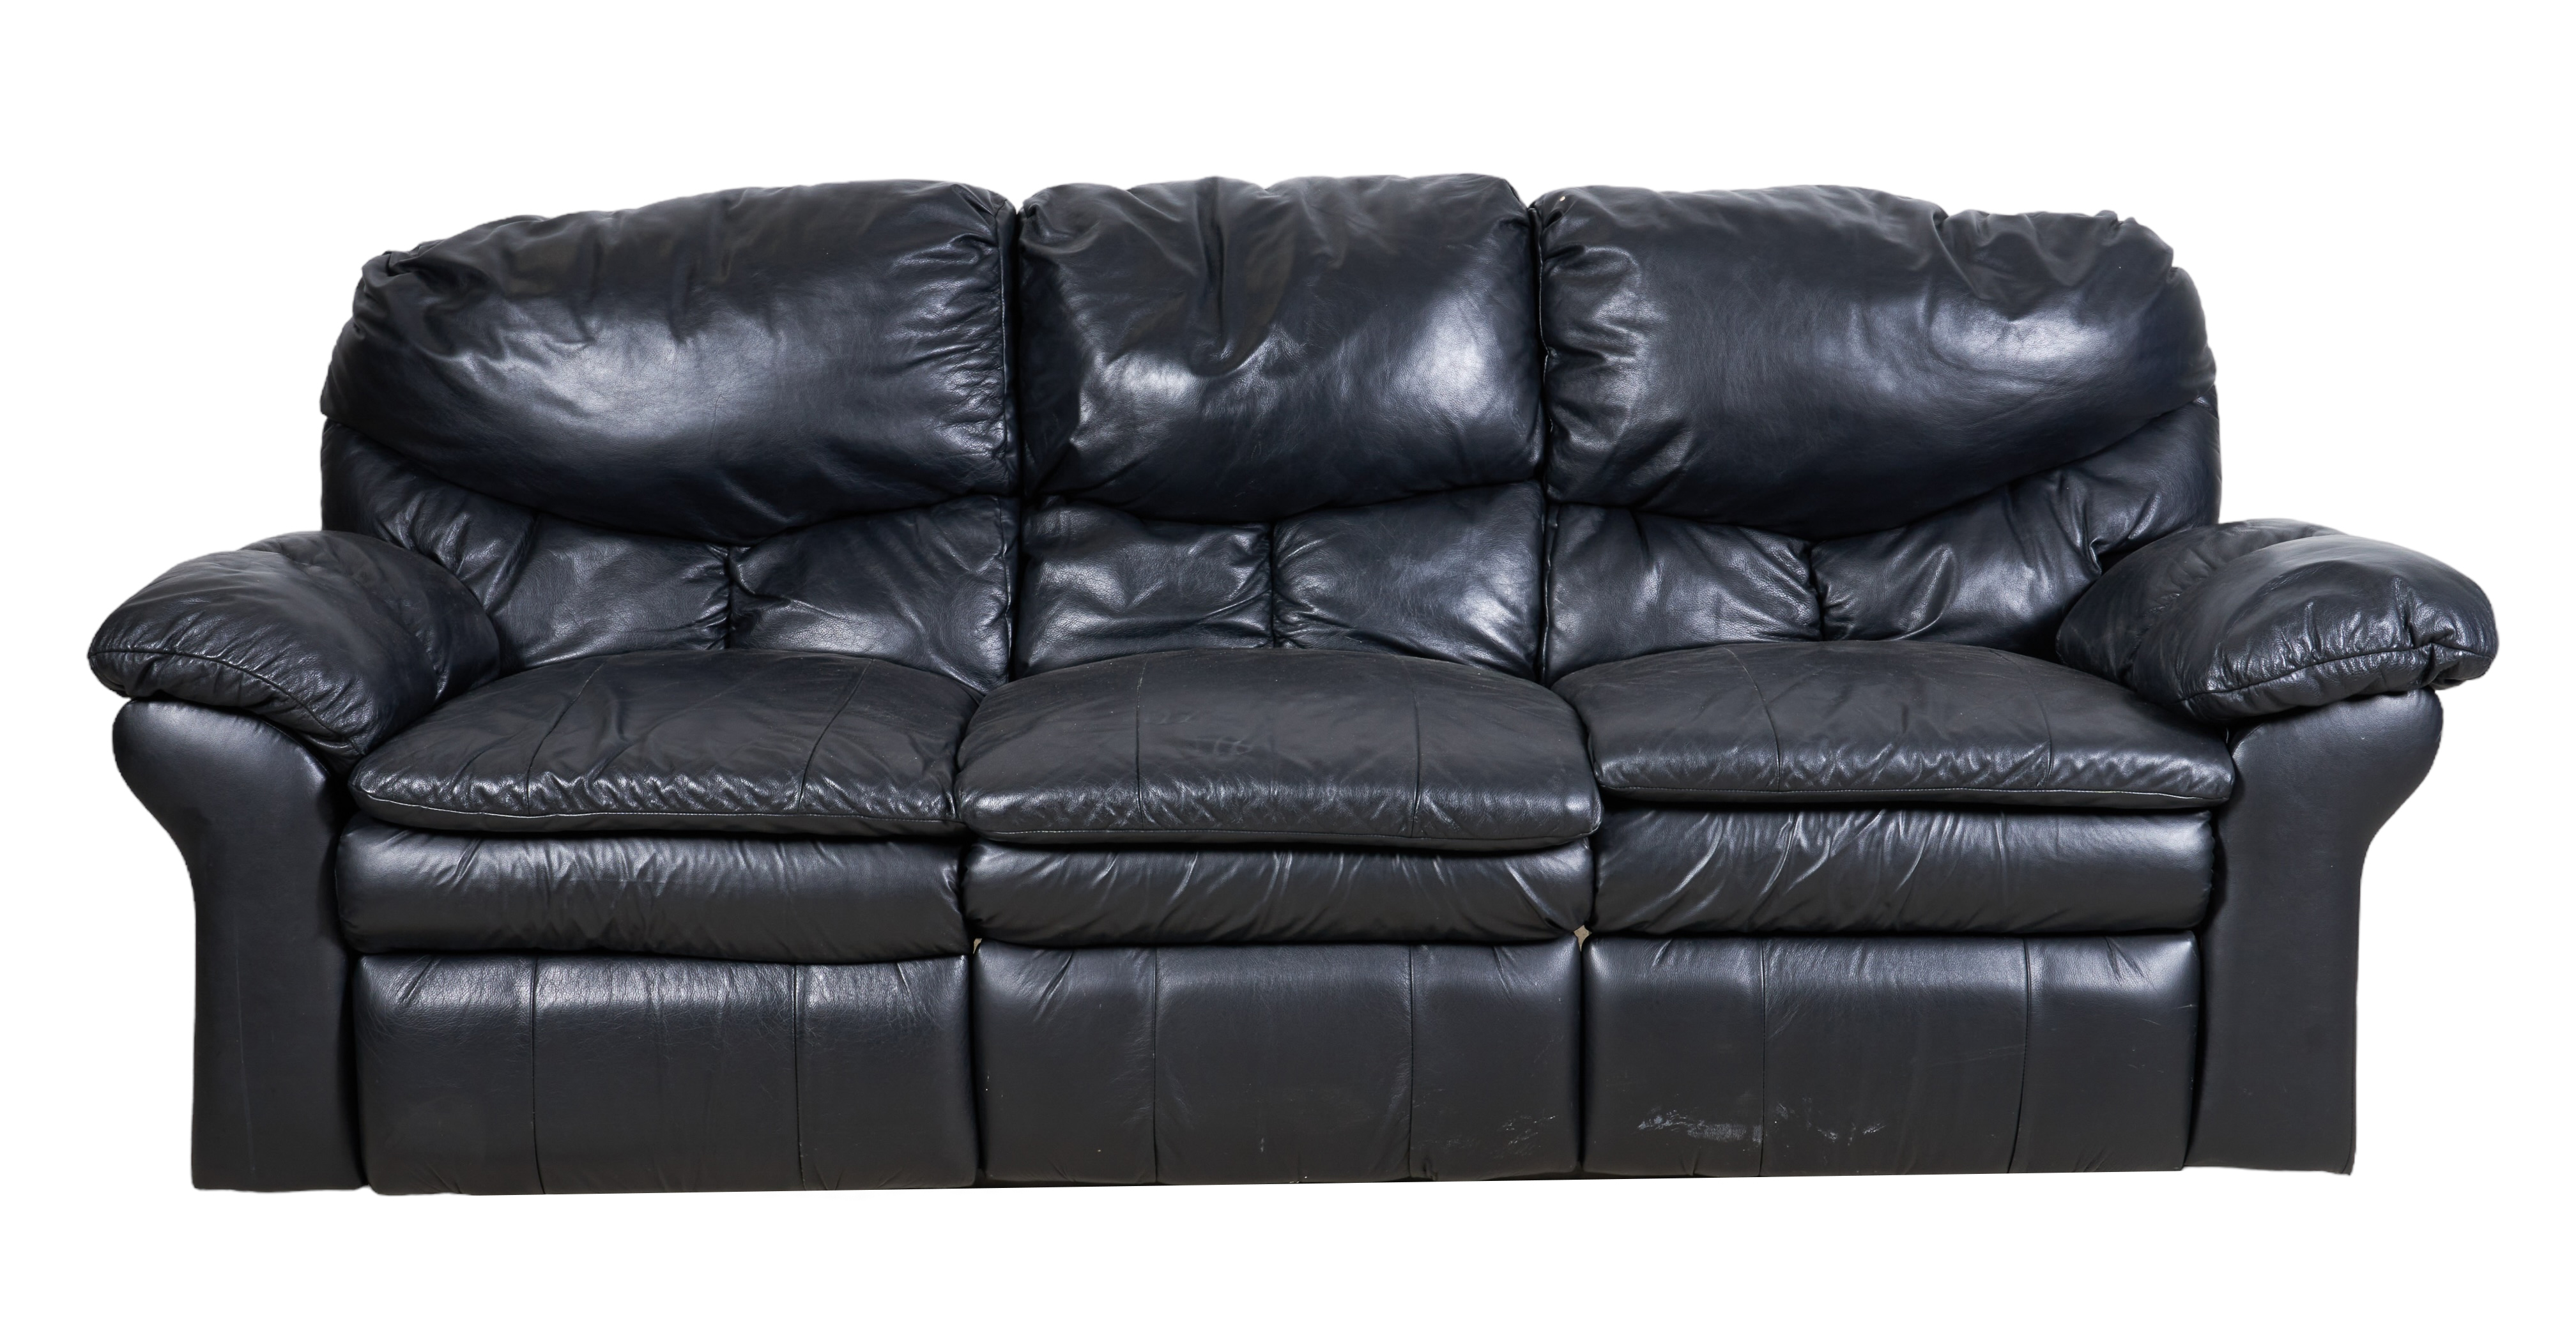 Contemporary leather upholstered 3-seat